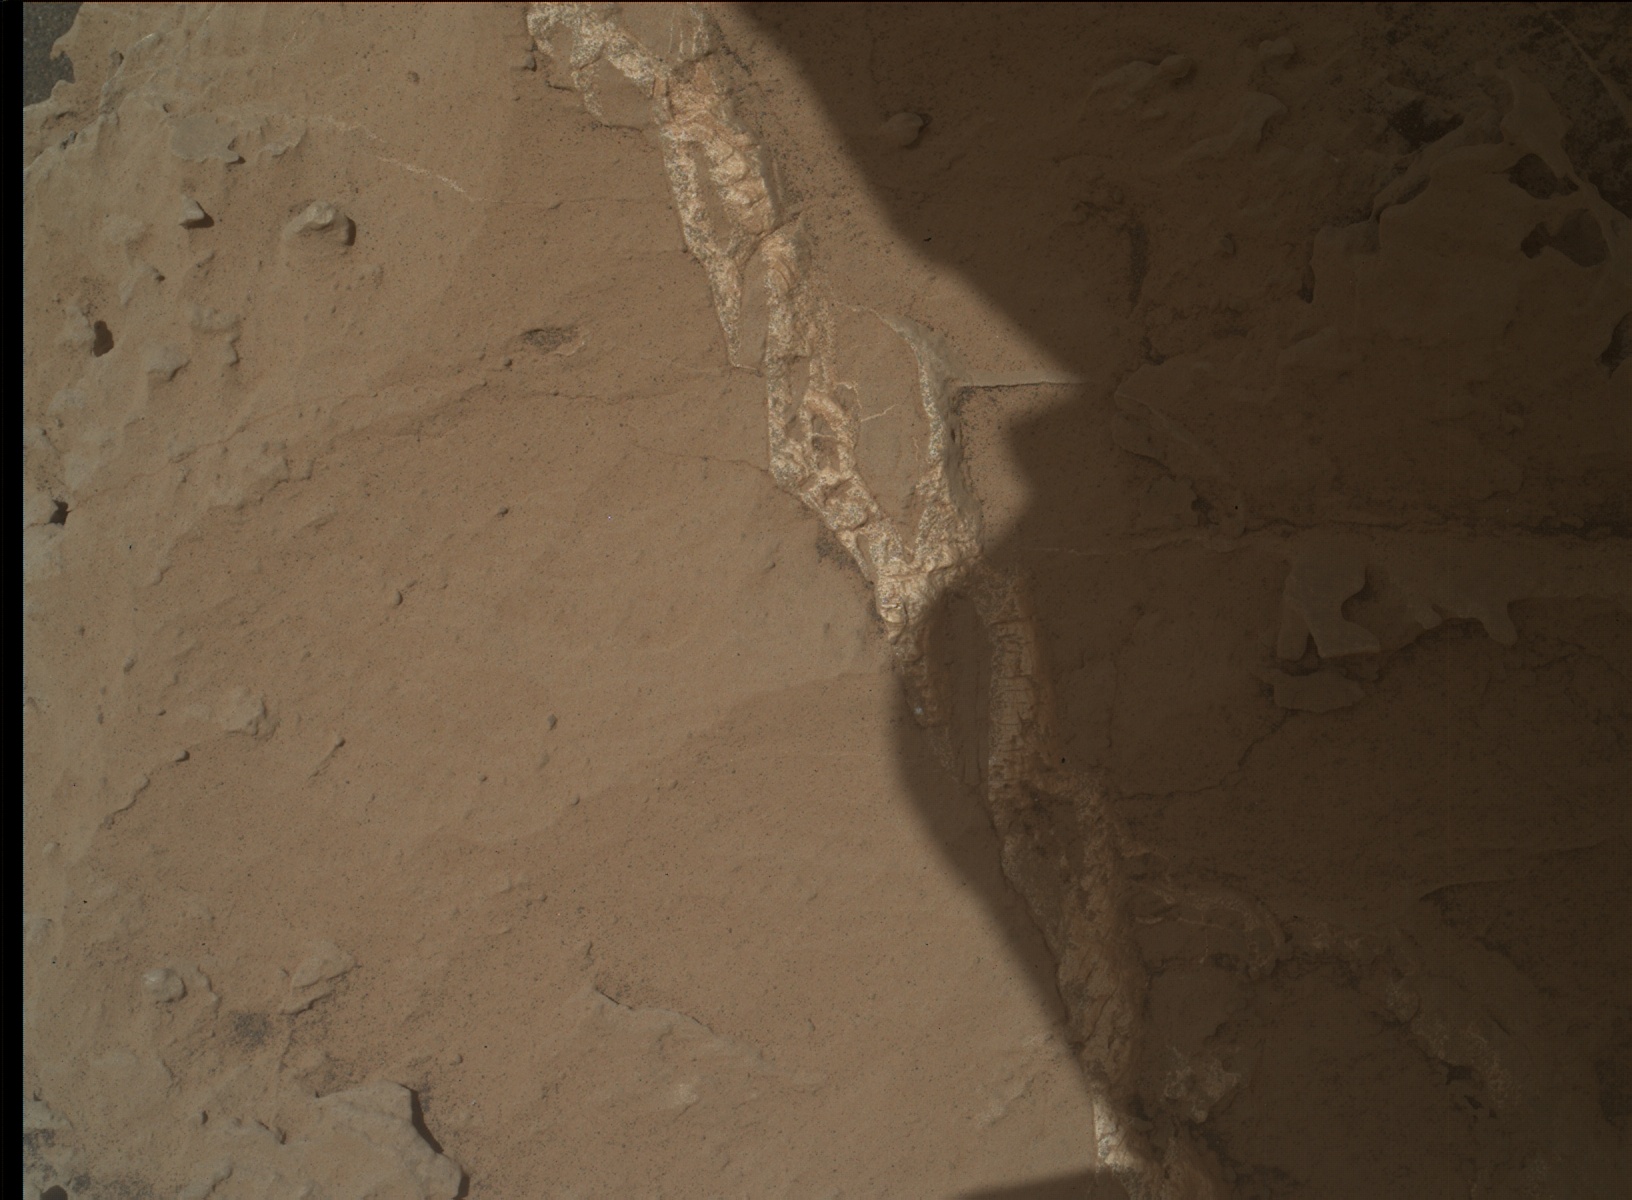 Nasa's Mars rover Curiosity acquired this image using its Mars Hand Lens Imager (MAHLI) on Sol 3117